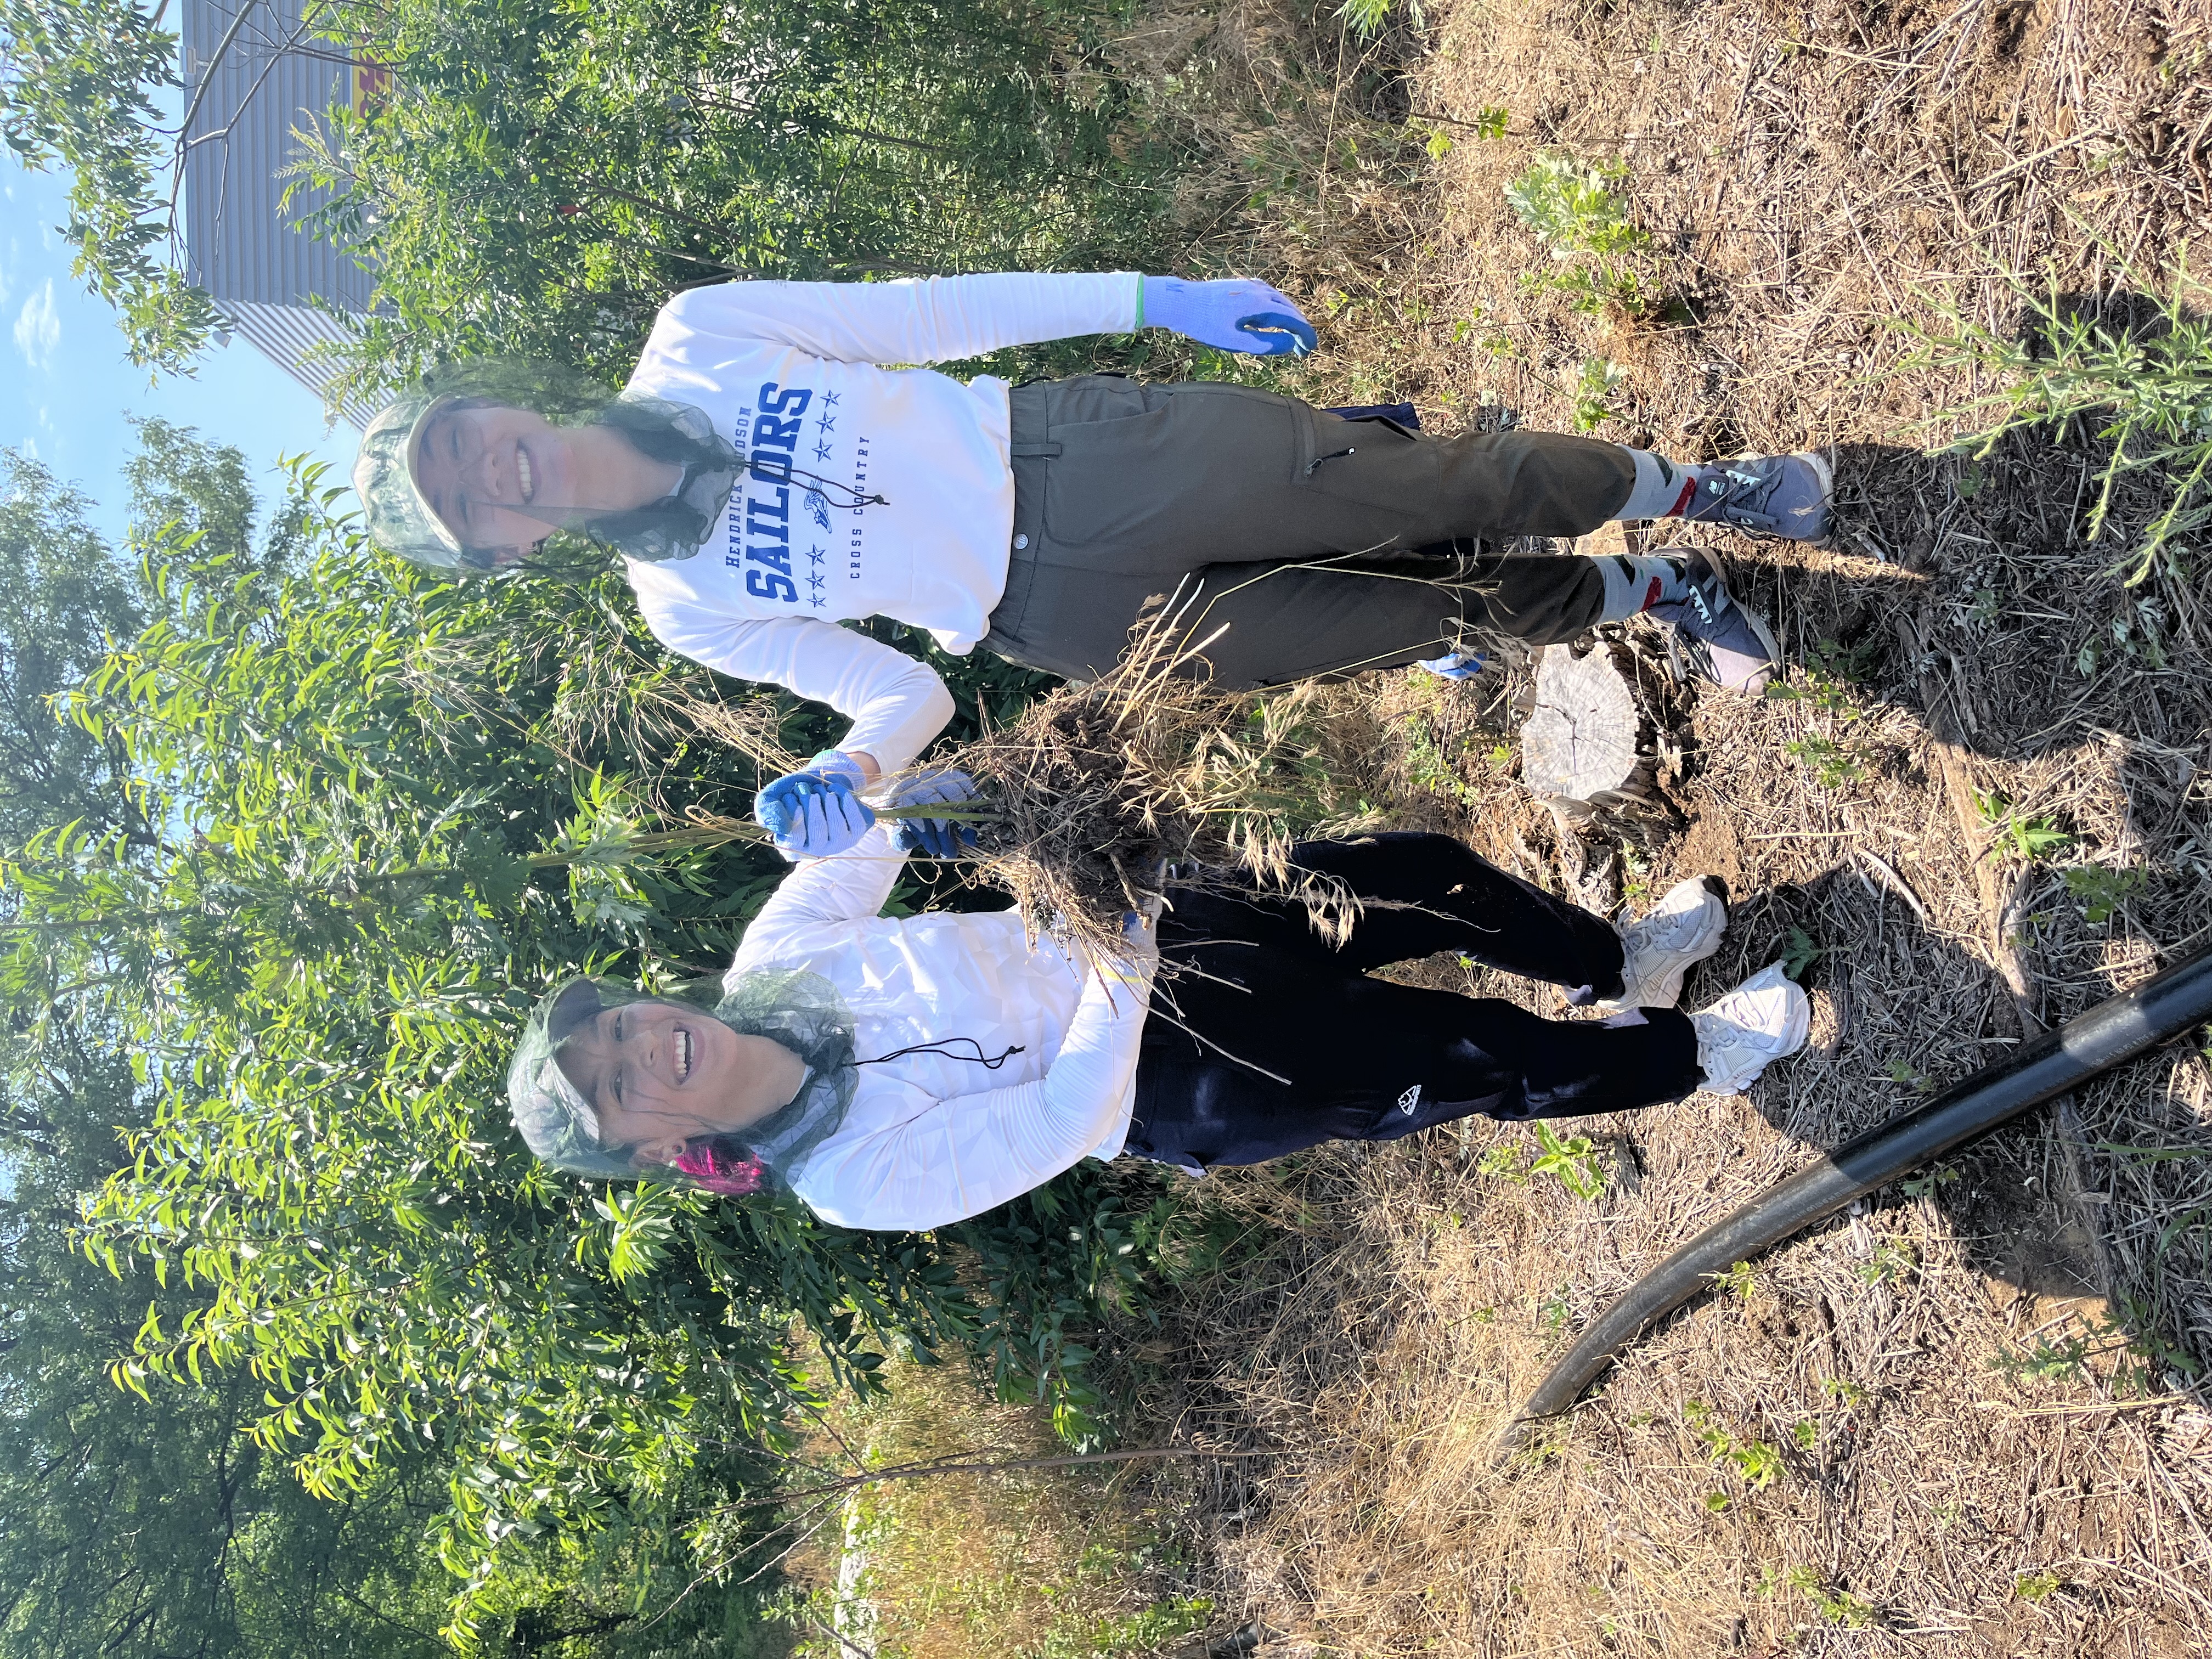 Science Learning & Public Engagement student Diana Lauri (left) with another Natural Area Conservancy’s Summer 2022 CUNY intern pulls up mugwort, an invasive species in NYC. By removing these plants, they are giving native meadow plants in Idlewild Park in Queens a chance to thrive.